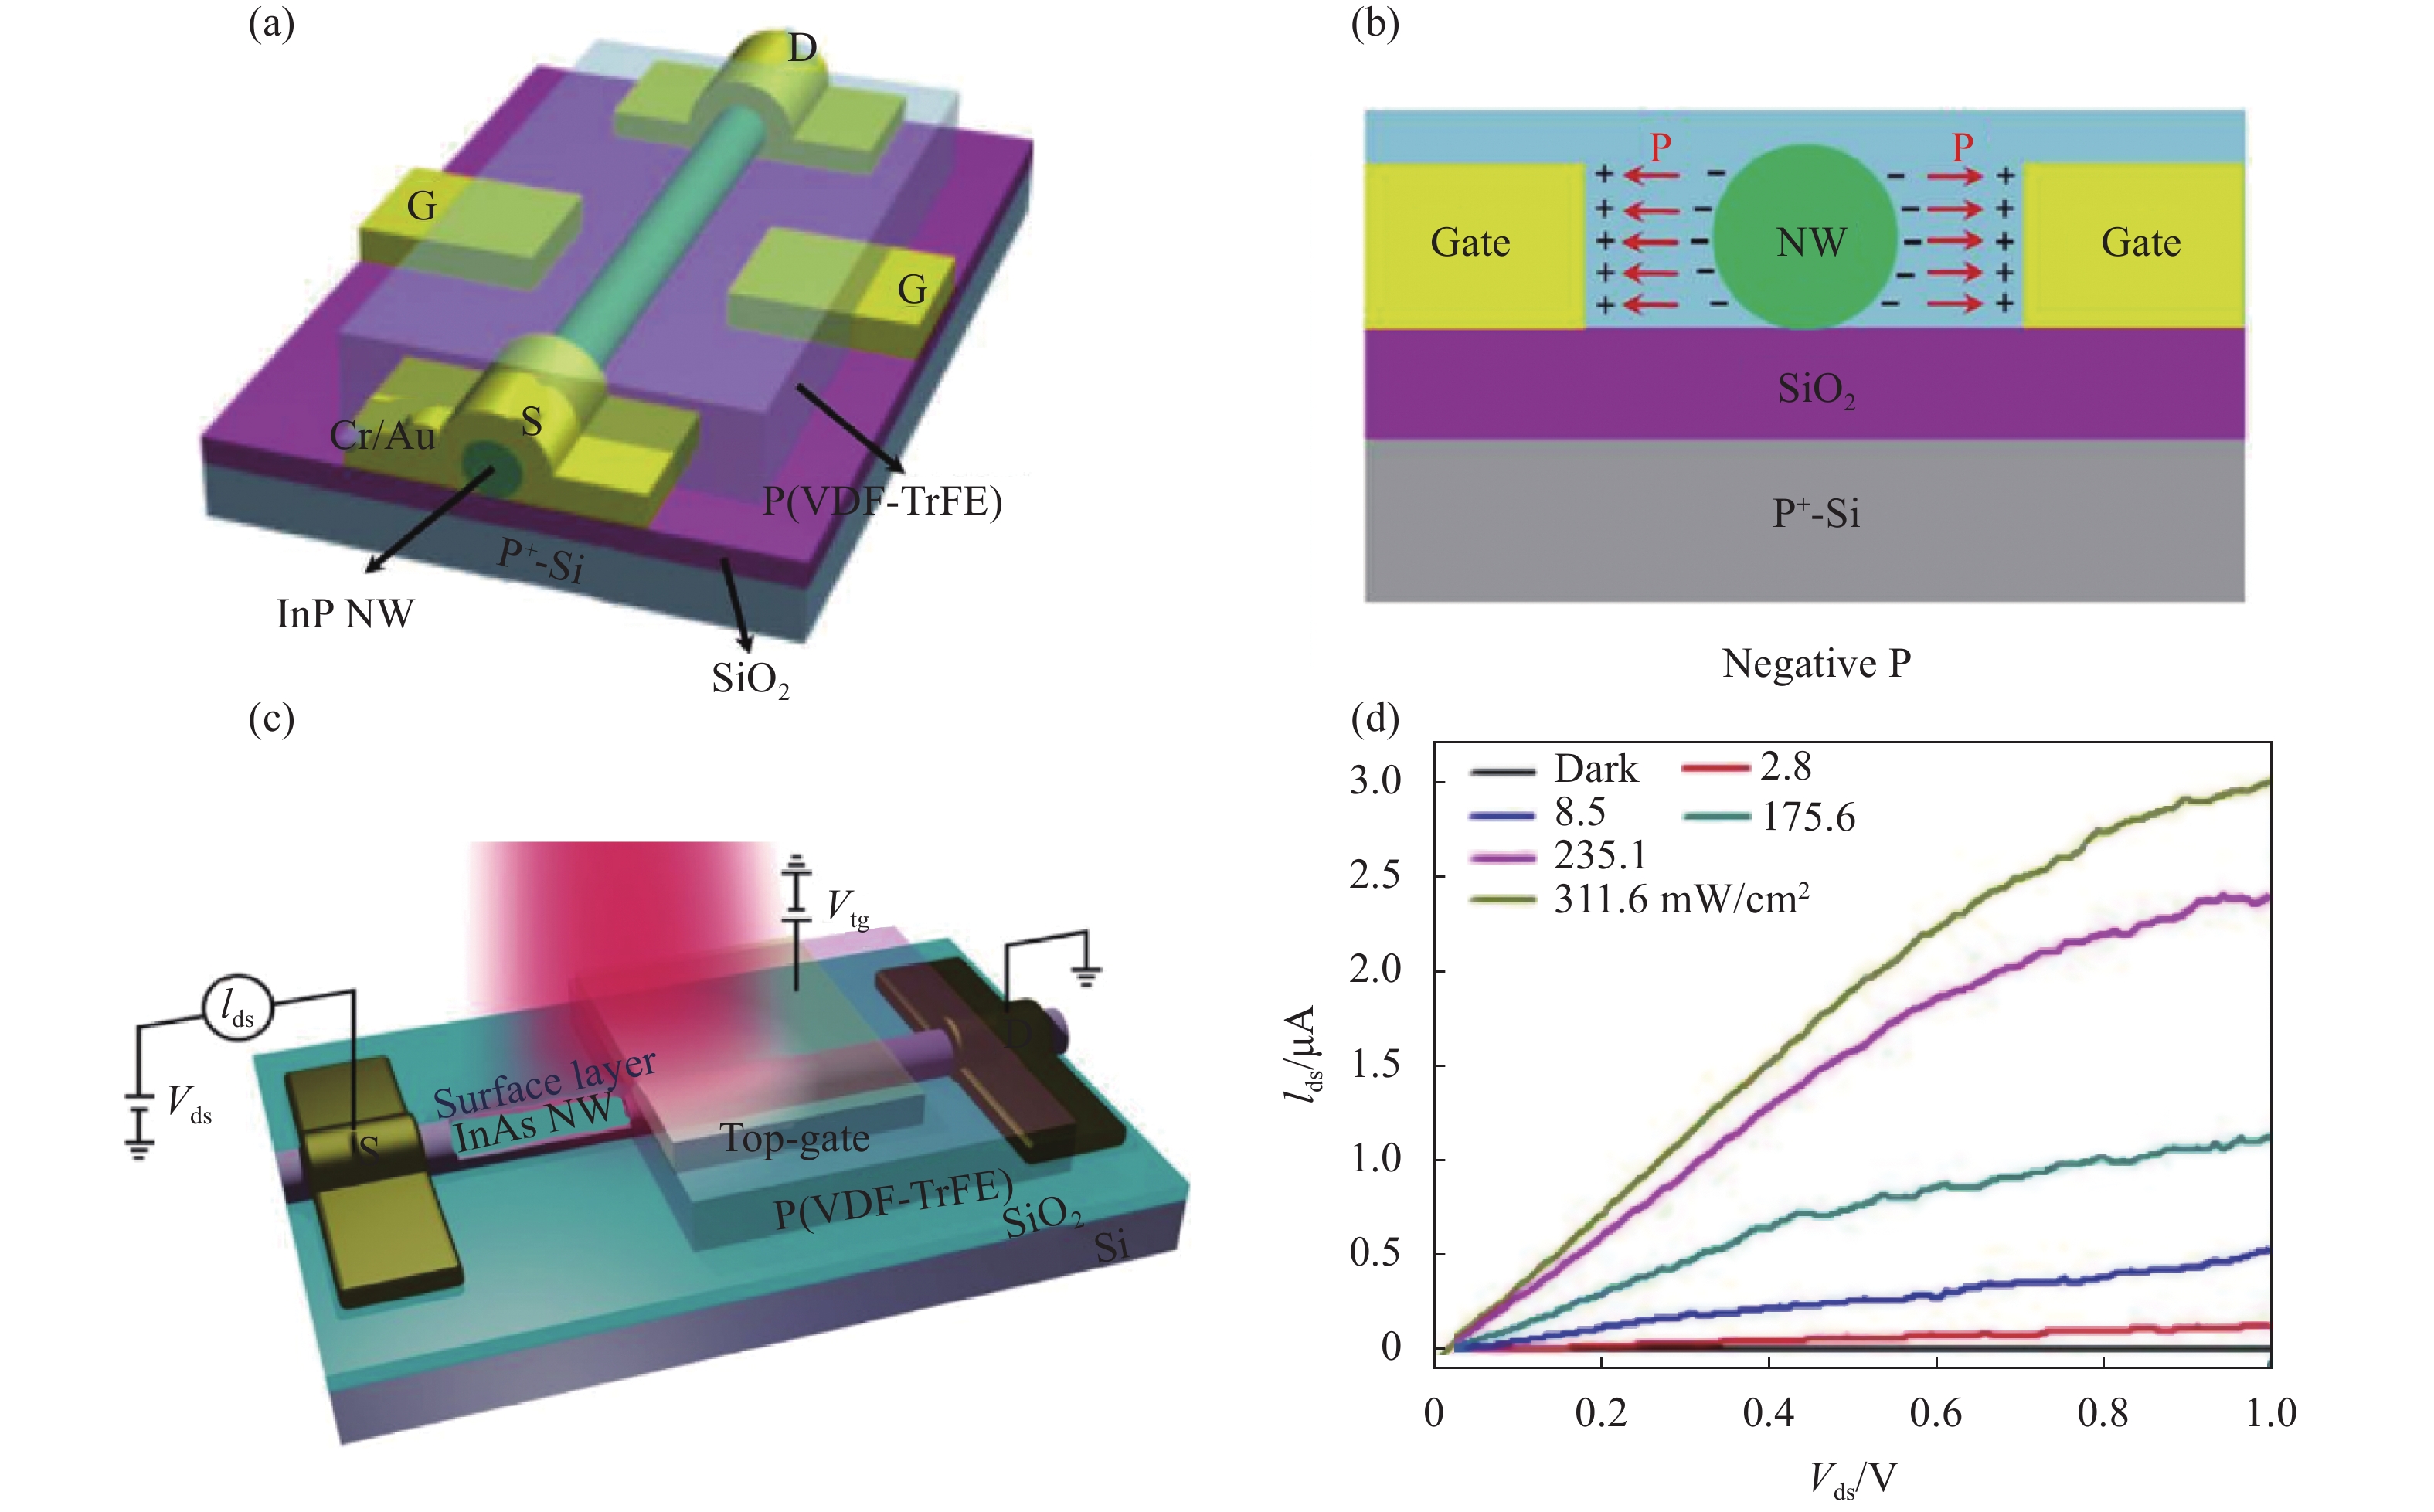 Ferroelectric localized field-enhanced nanowire photodetectors. (a) Device structure schematic of ferroelectric side-gated single InP NW； (b) Working principle diagram of the device in the negative polarization state[15]； (c) Device structure schematic of ferroelectric top-gated single InAs NW； (d) Output characteristic curves of the device for 3.5 μm exciting light at different power densities[18]